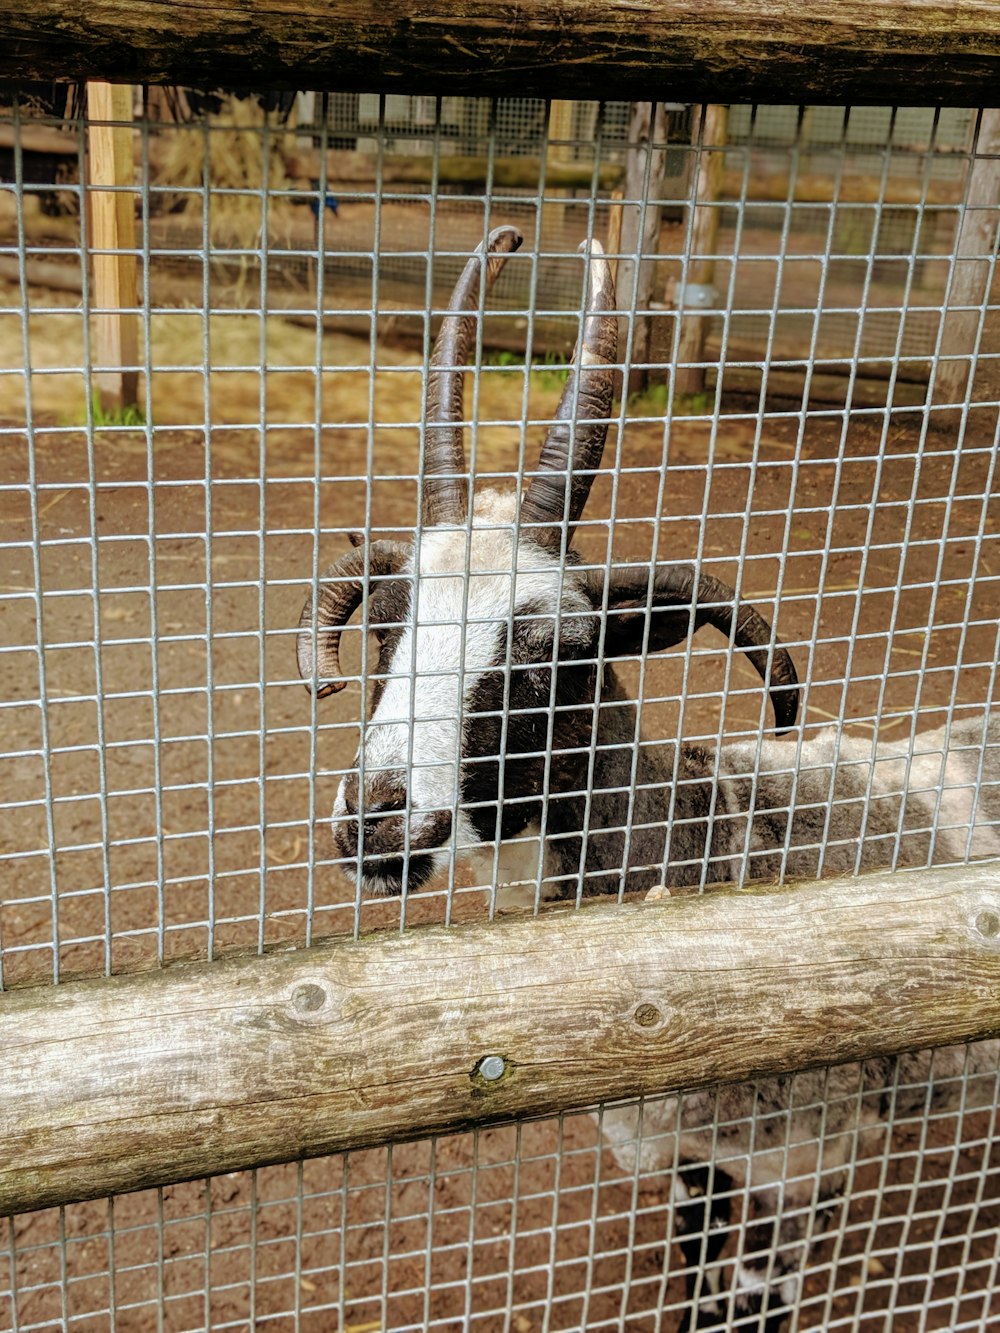 goat on the other side of the fence